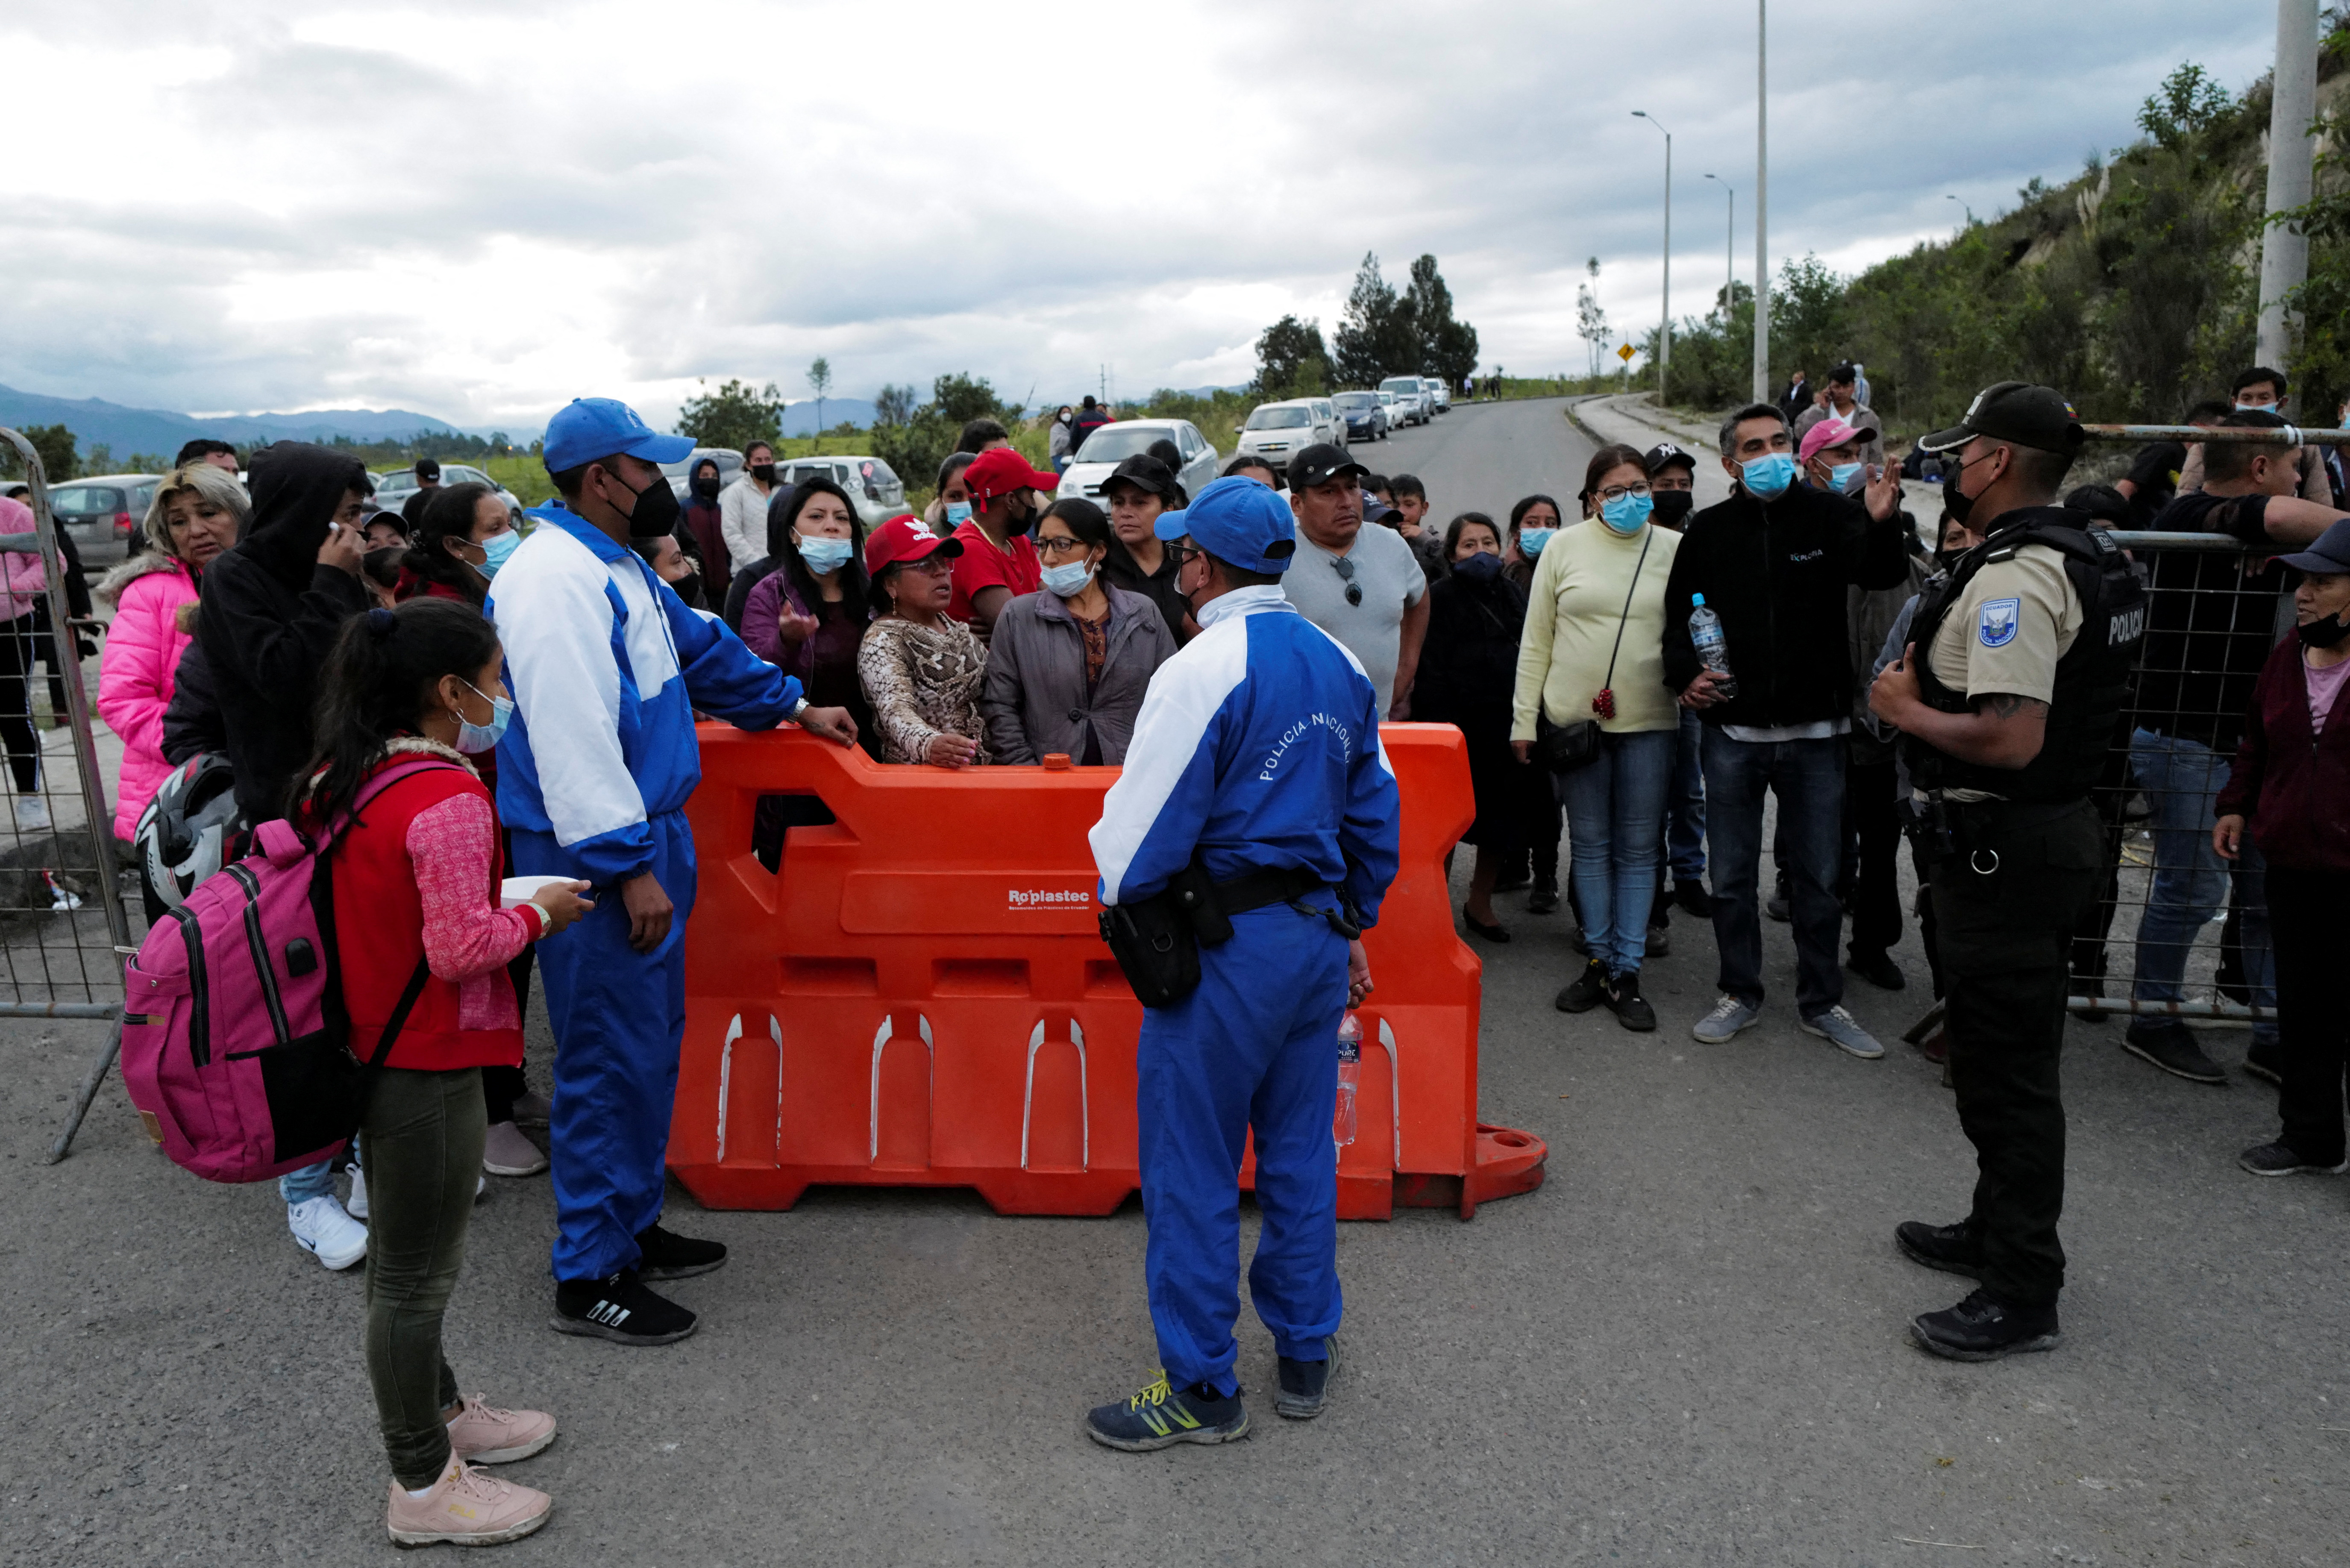 Relatives of inmates stand at a police checkpoint waiting for news of their loved ones after a riot broke out at the El Turi prison where several inmates were killed or injured, in Cuenca